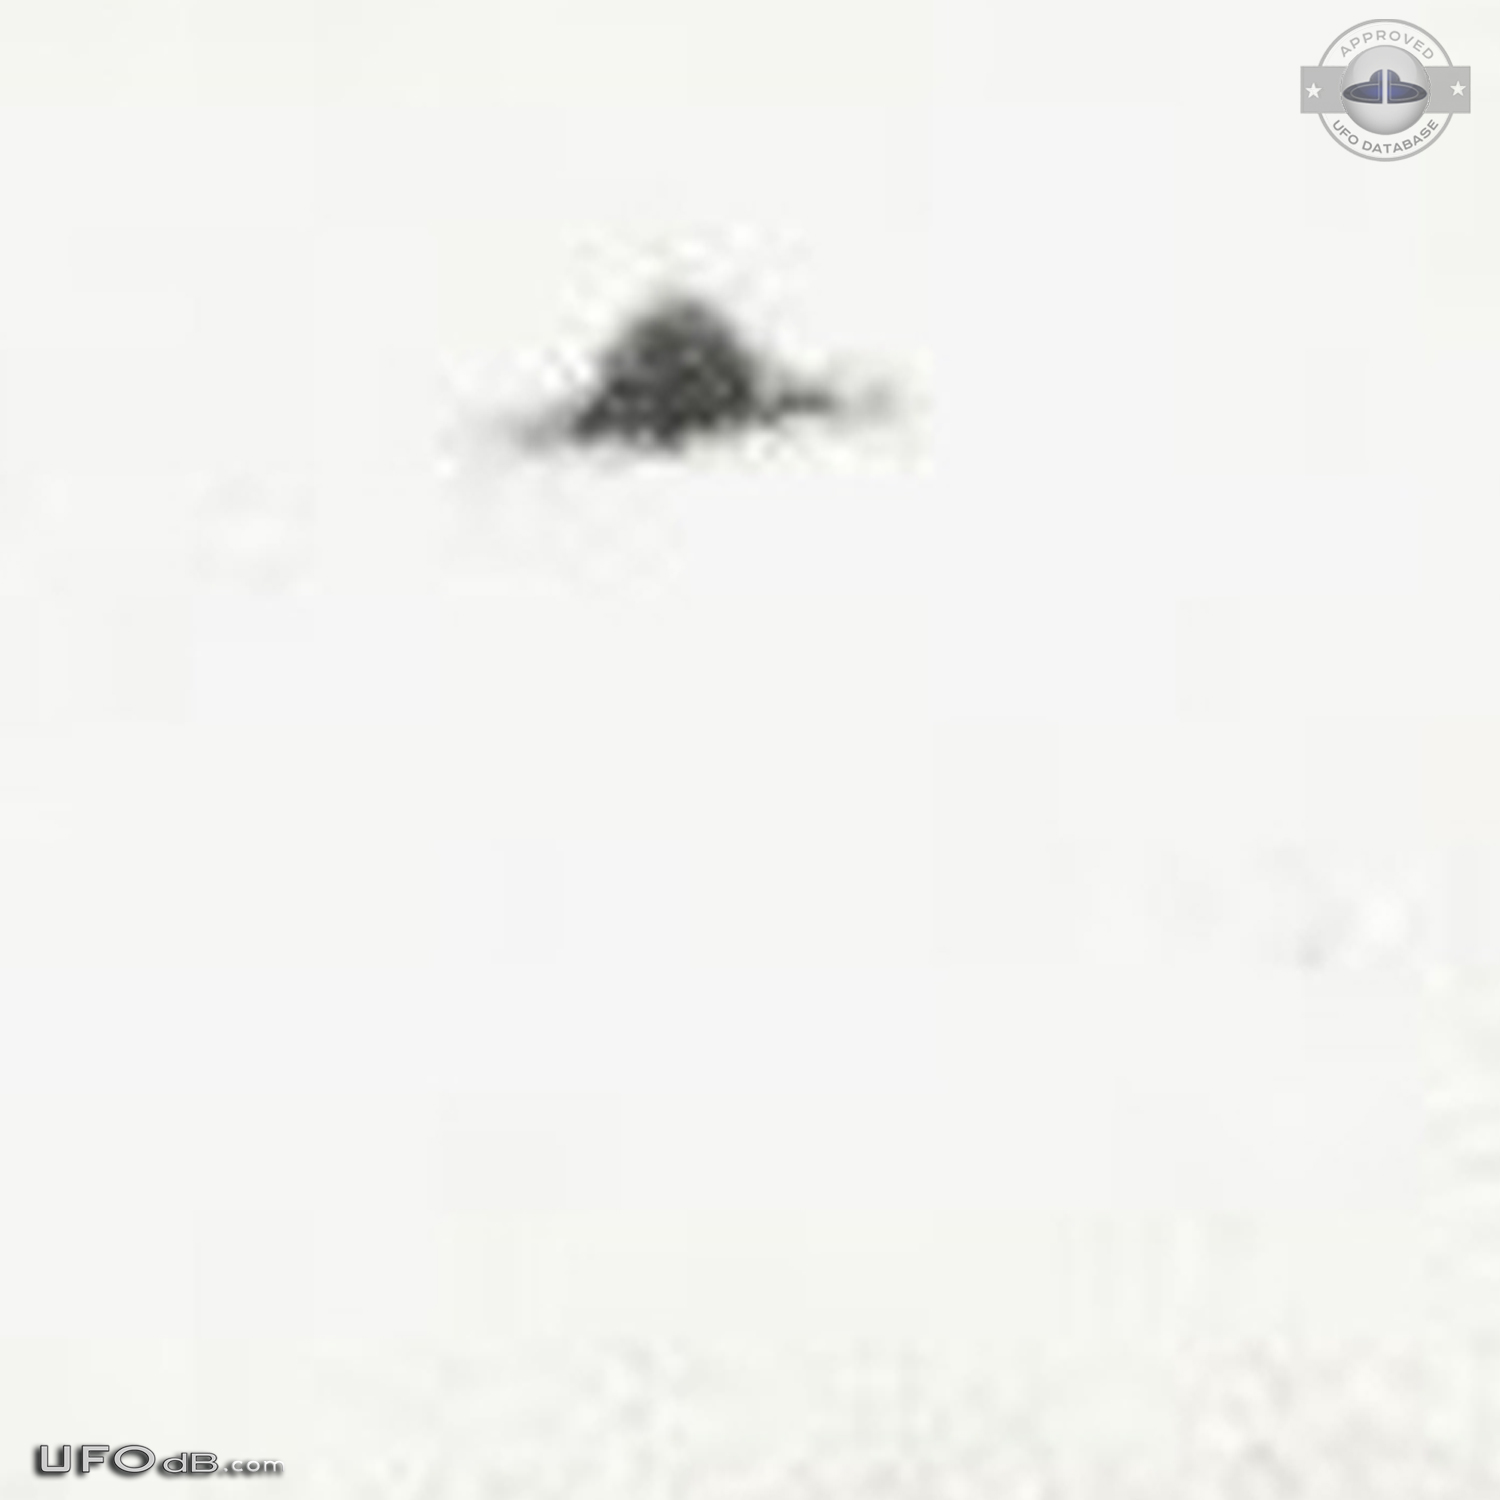 Picture of snowman in Nanaimo BC Canada gets a passing saucer UFO 1975 UFO Picture #498-4